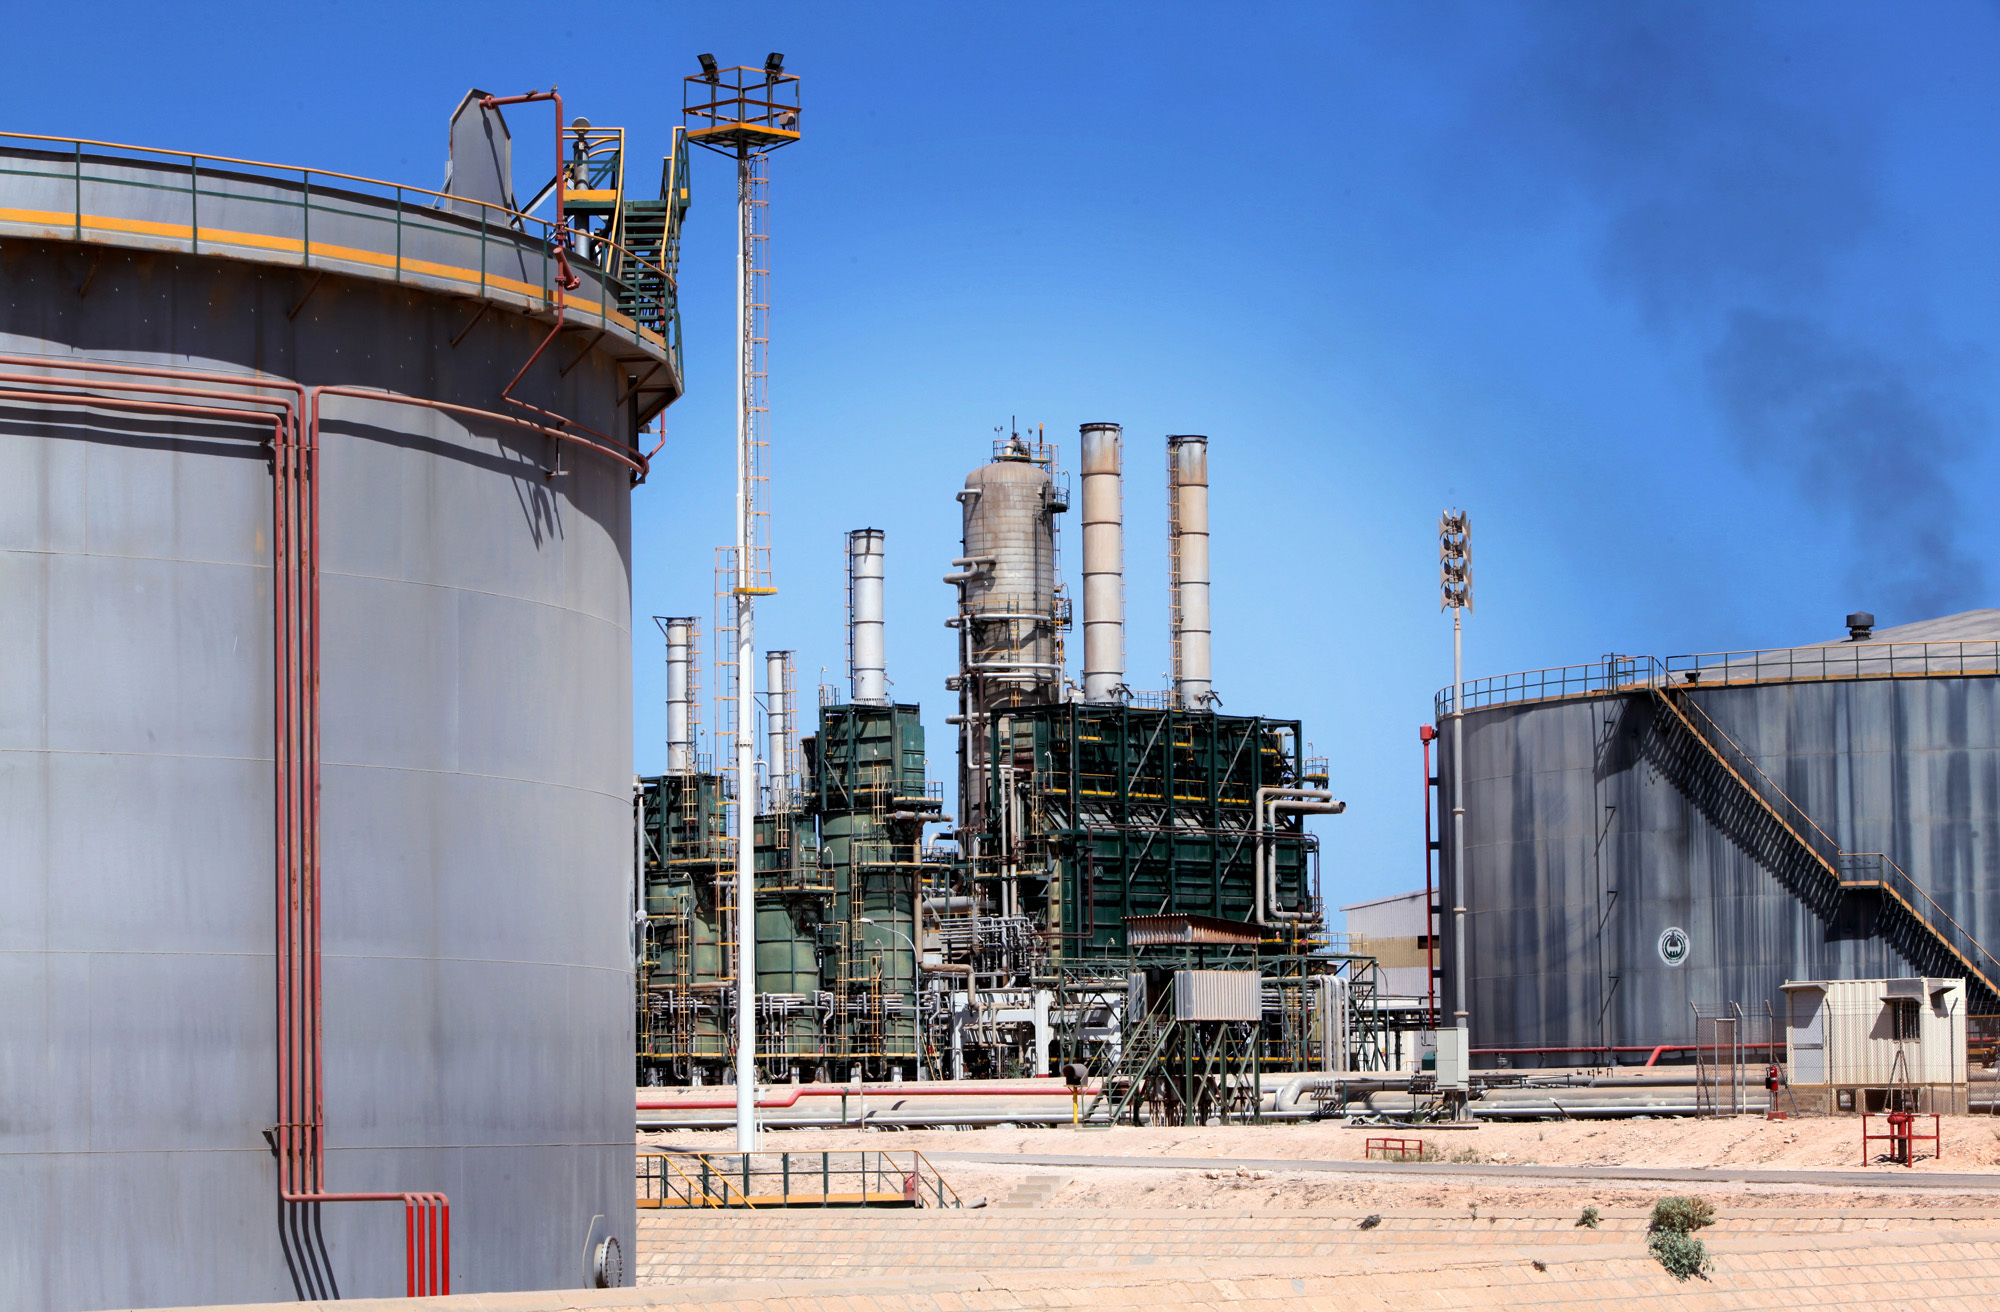 Refining towers and fuel storage tanks are seen at the Zawiya oil refinery near Tripoli, Libya, on Monday, Aug. 29, 2011.  Photographer: Shawn Baldwin/Bloomberg